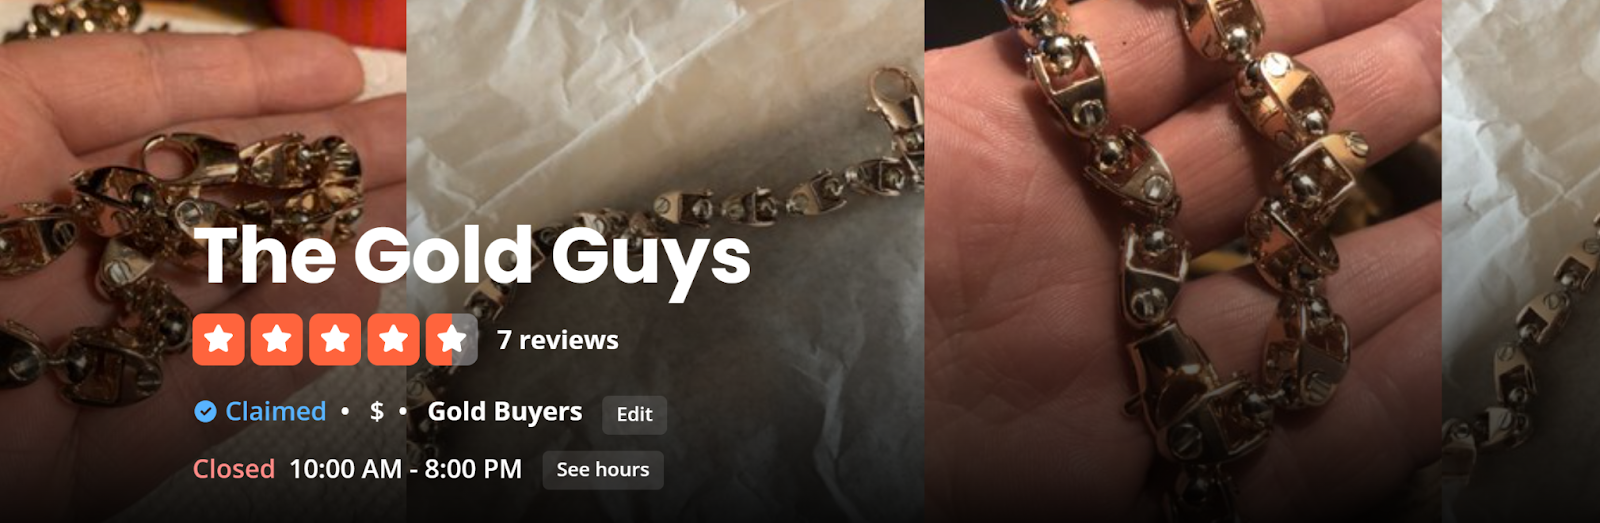 The Gold Guys reviews on Yelp